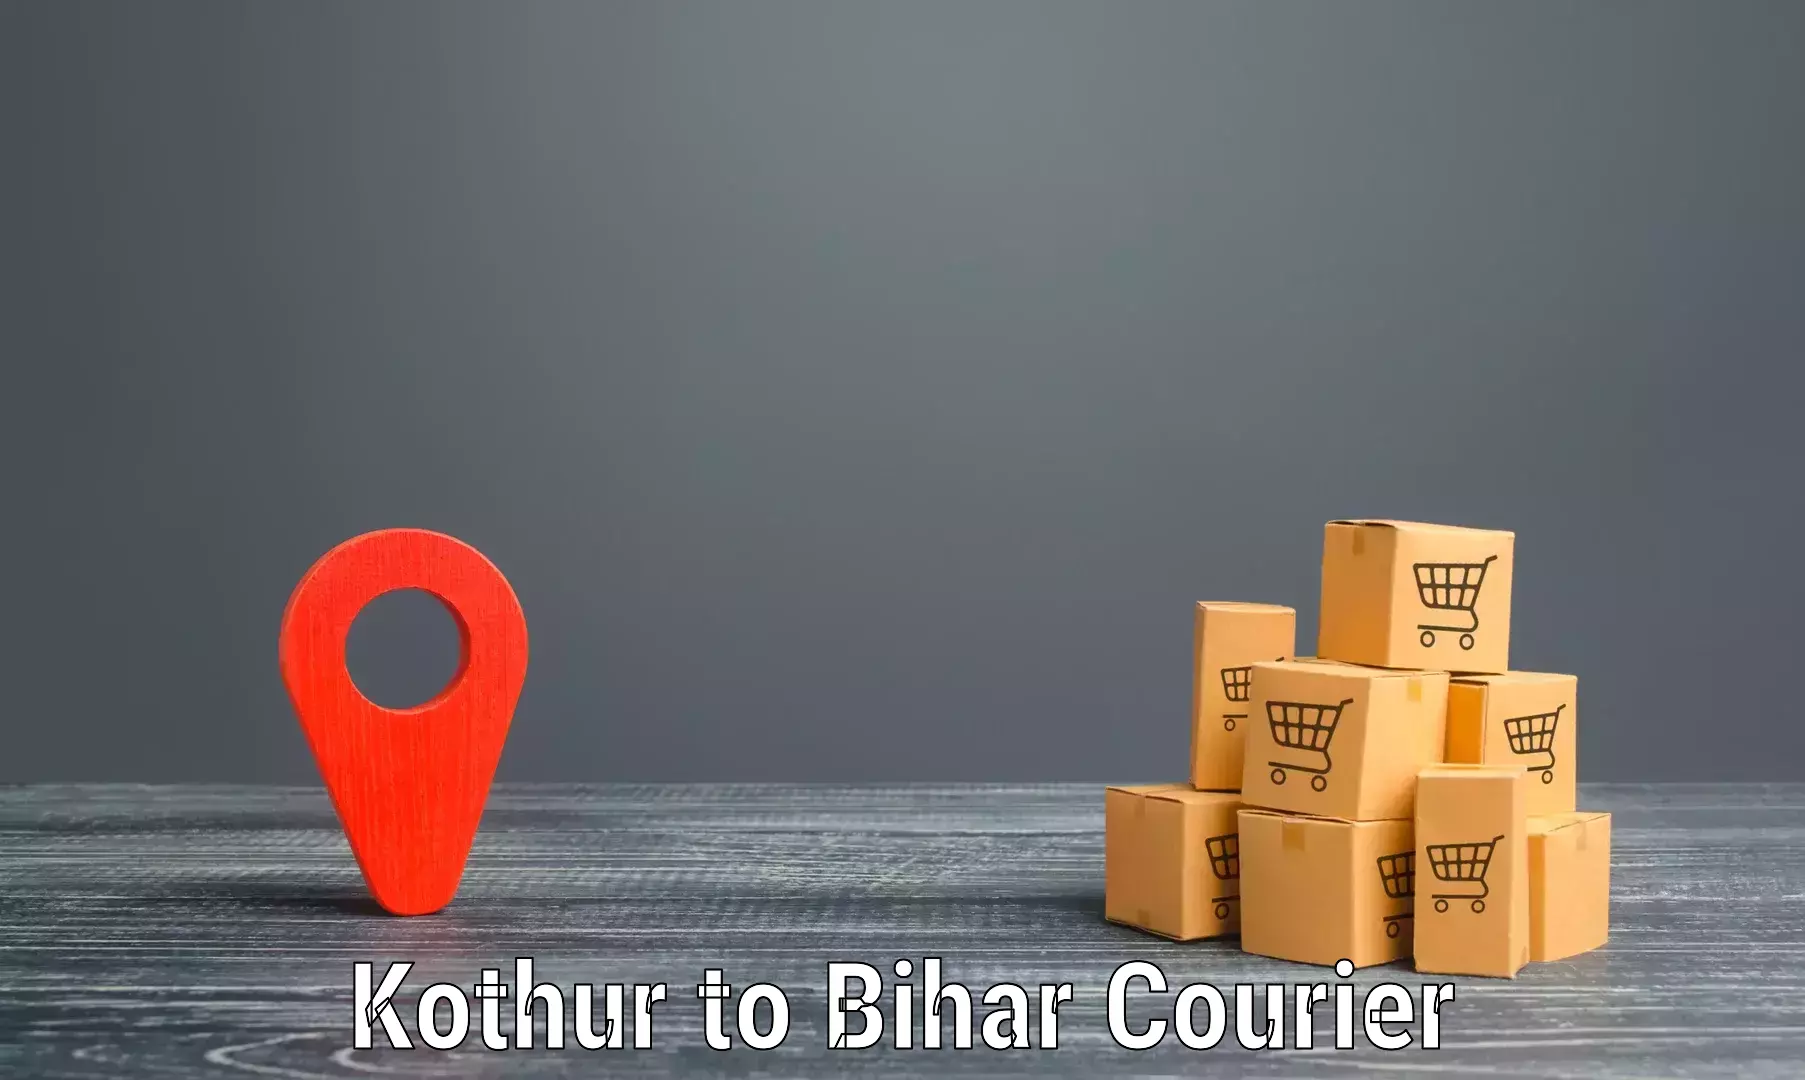 Courier service innovation Kothur to Phulparas